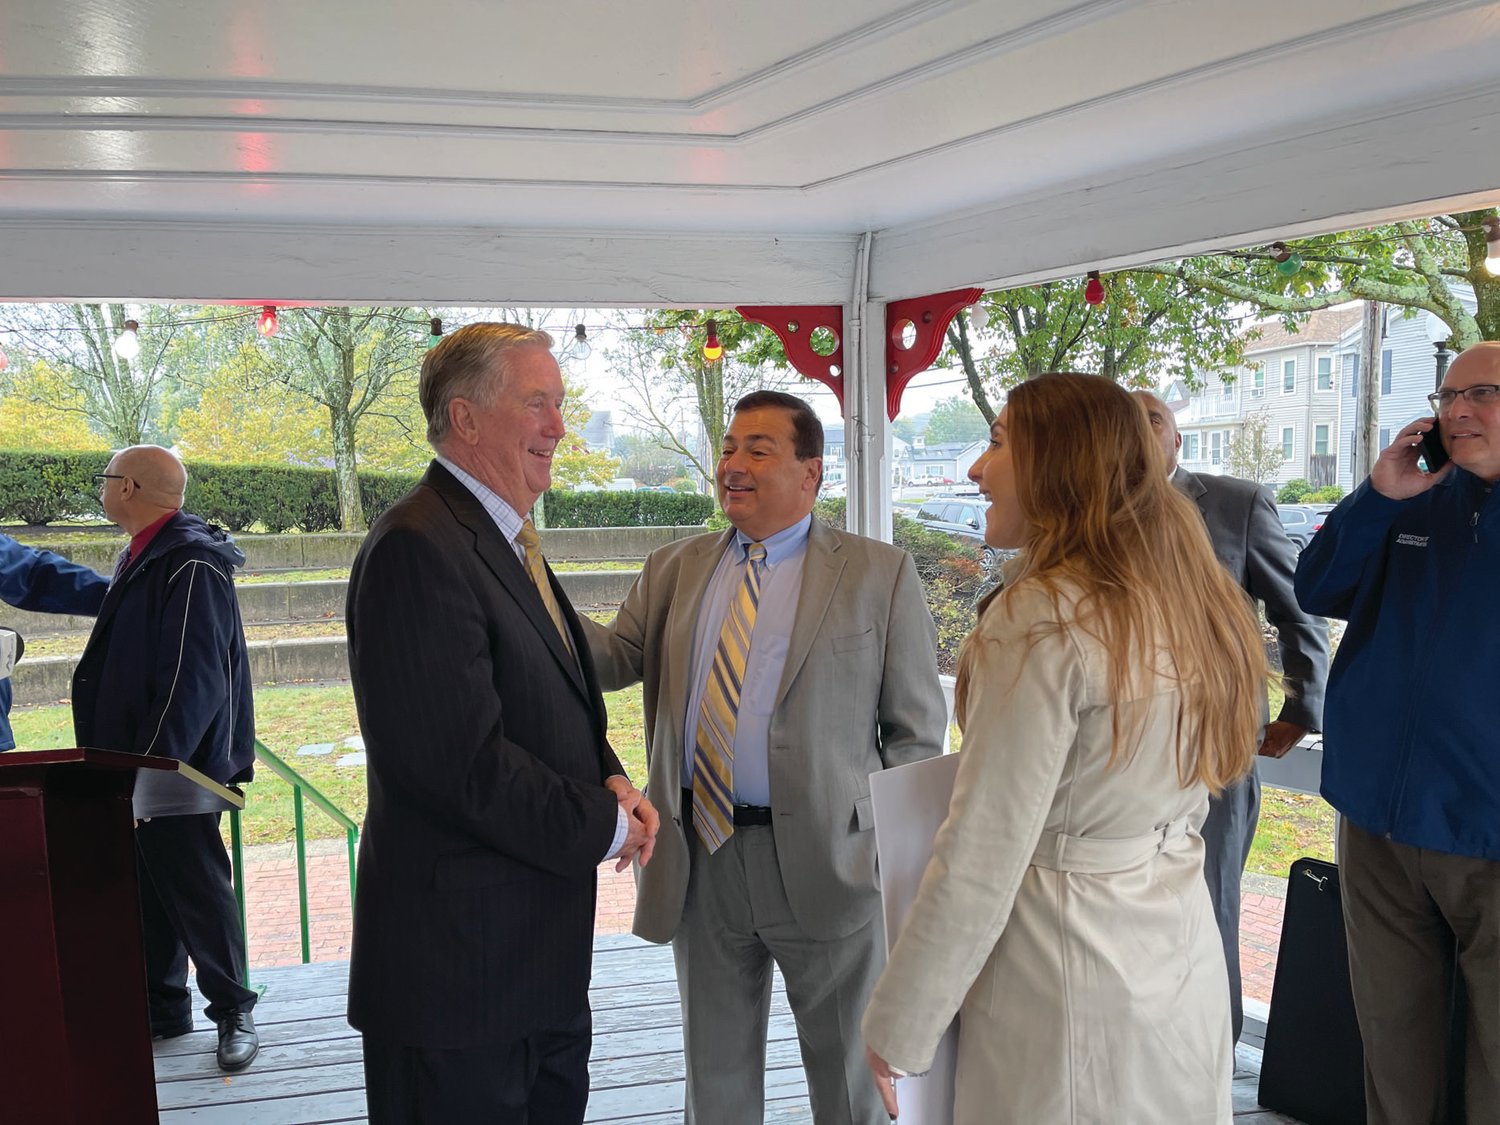 LOCAL LEADERS: Mayor Ken Hopkins shares a moment with House Speaker K. Joseph Shekarchi and state Rep. Jacquelyn Baginski prior to the start of Monday’s event.